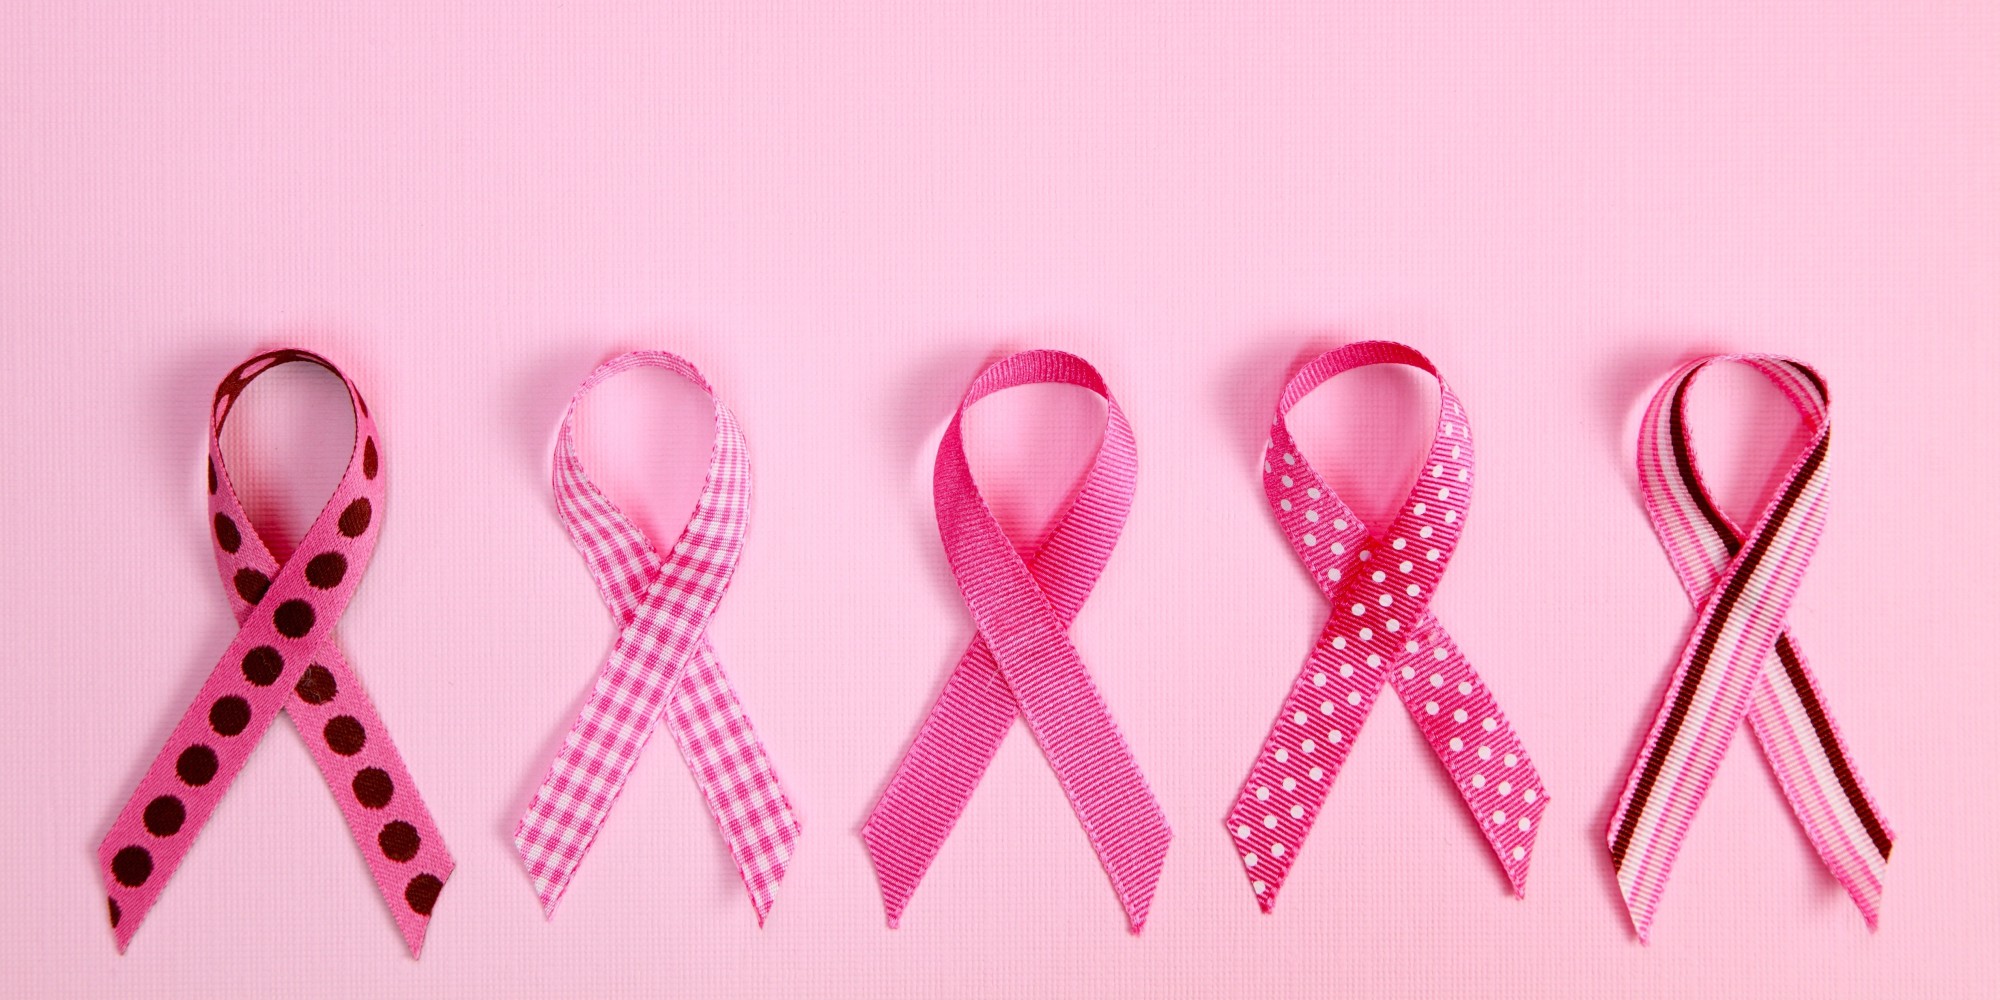 Breast Cancer Awareness Ribbon Wallpaper Vector Images over 200